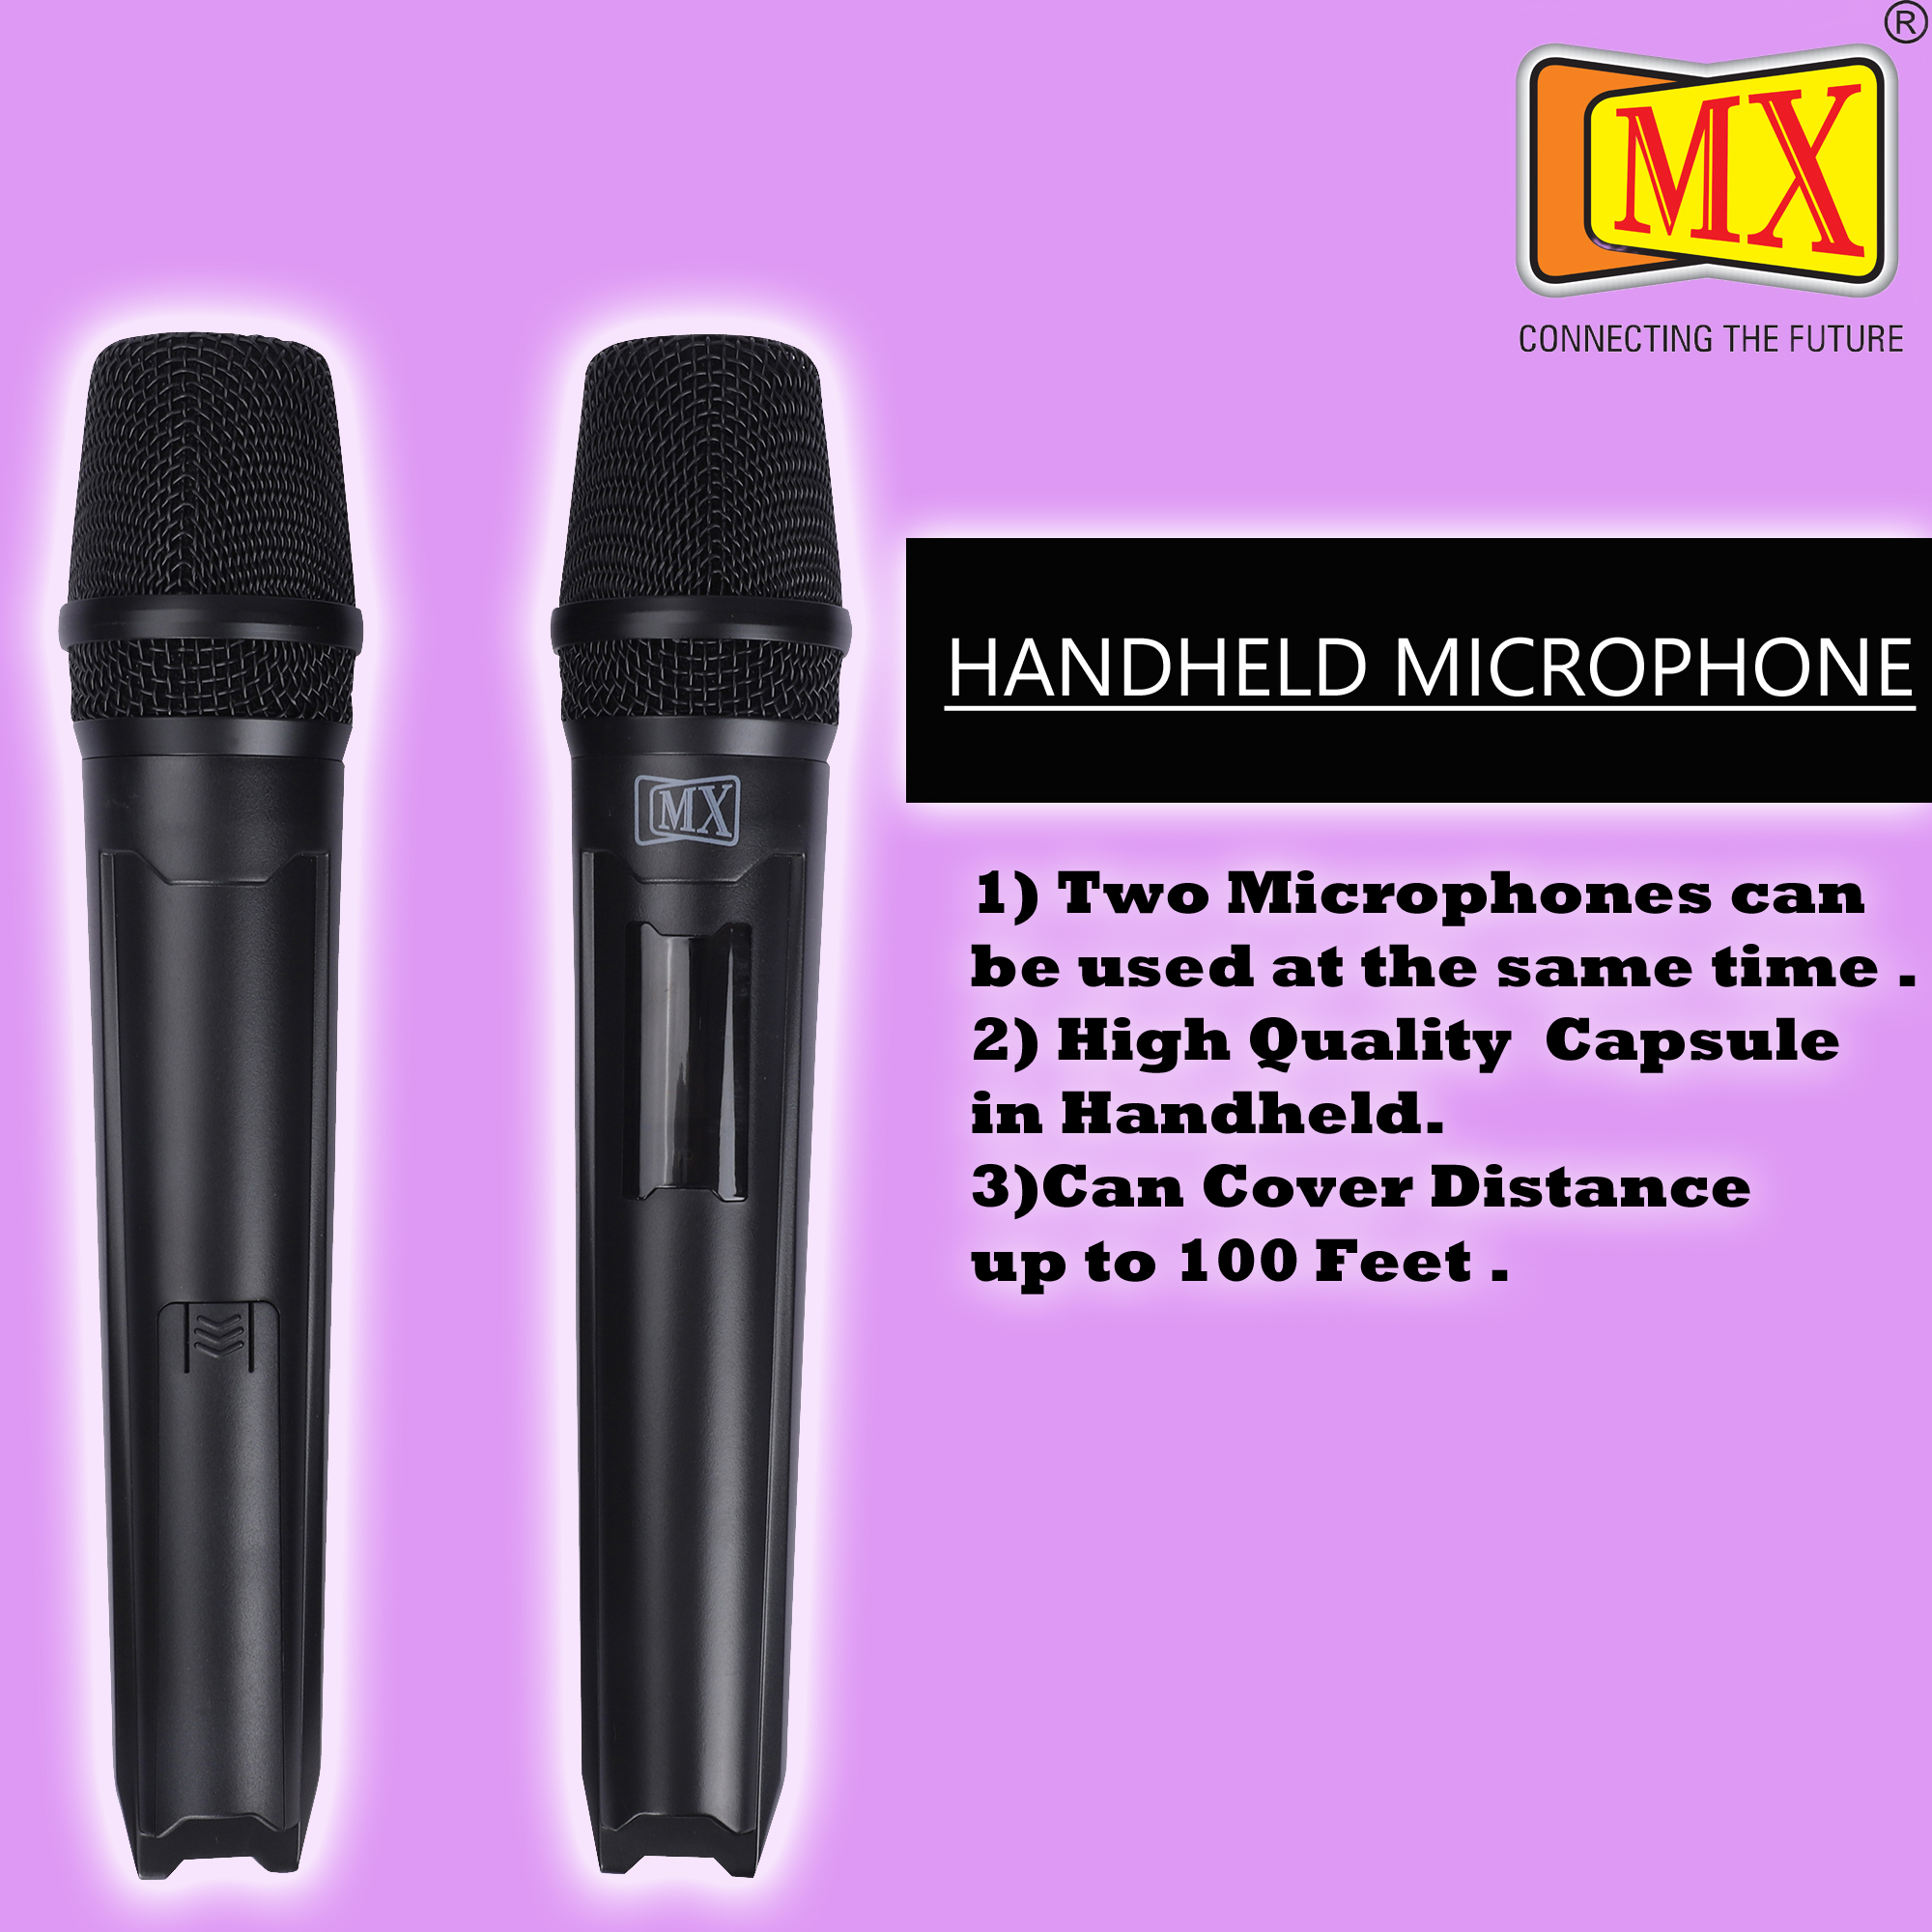 MX UHF Wireless Microphone System with one handheld mic, featuring variable  frequency for parties, wedding hosts, business meetings, and multi-purpose  use. - MX MDR TECHNOLOGIES LIMITED